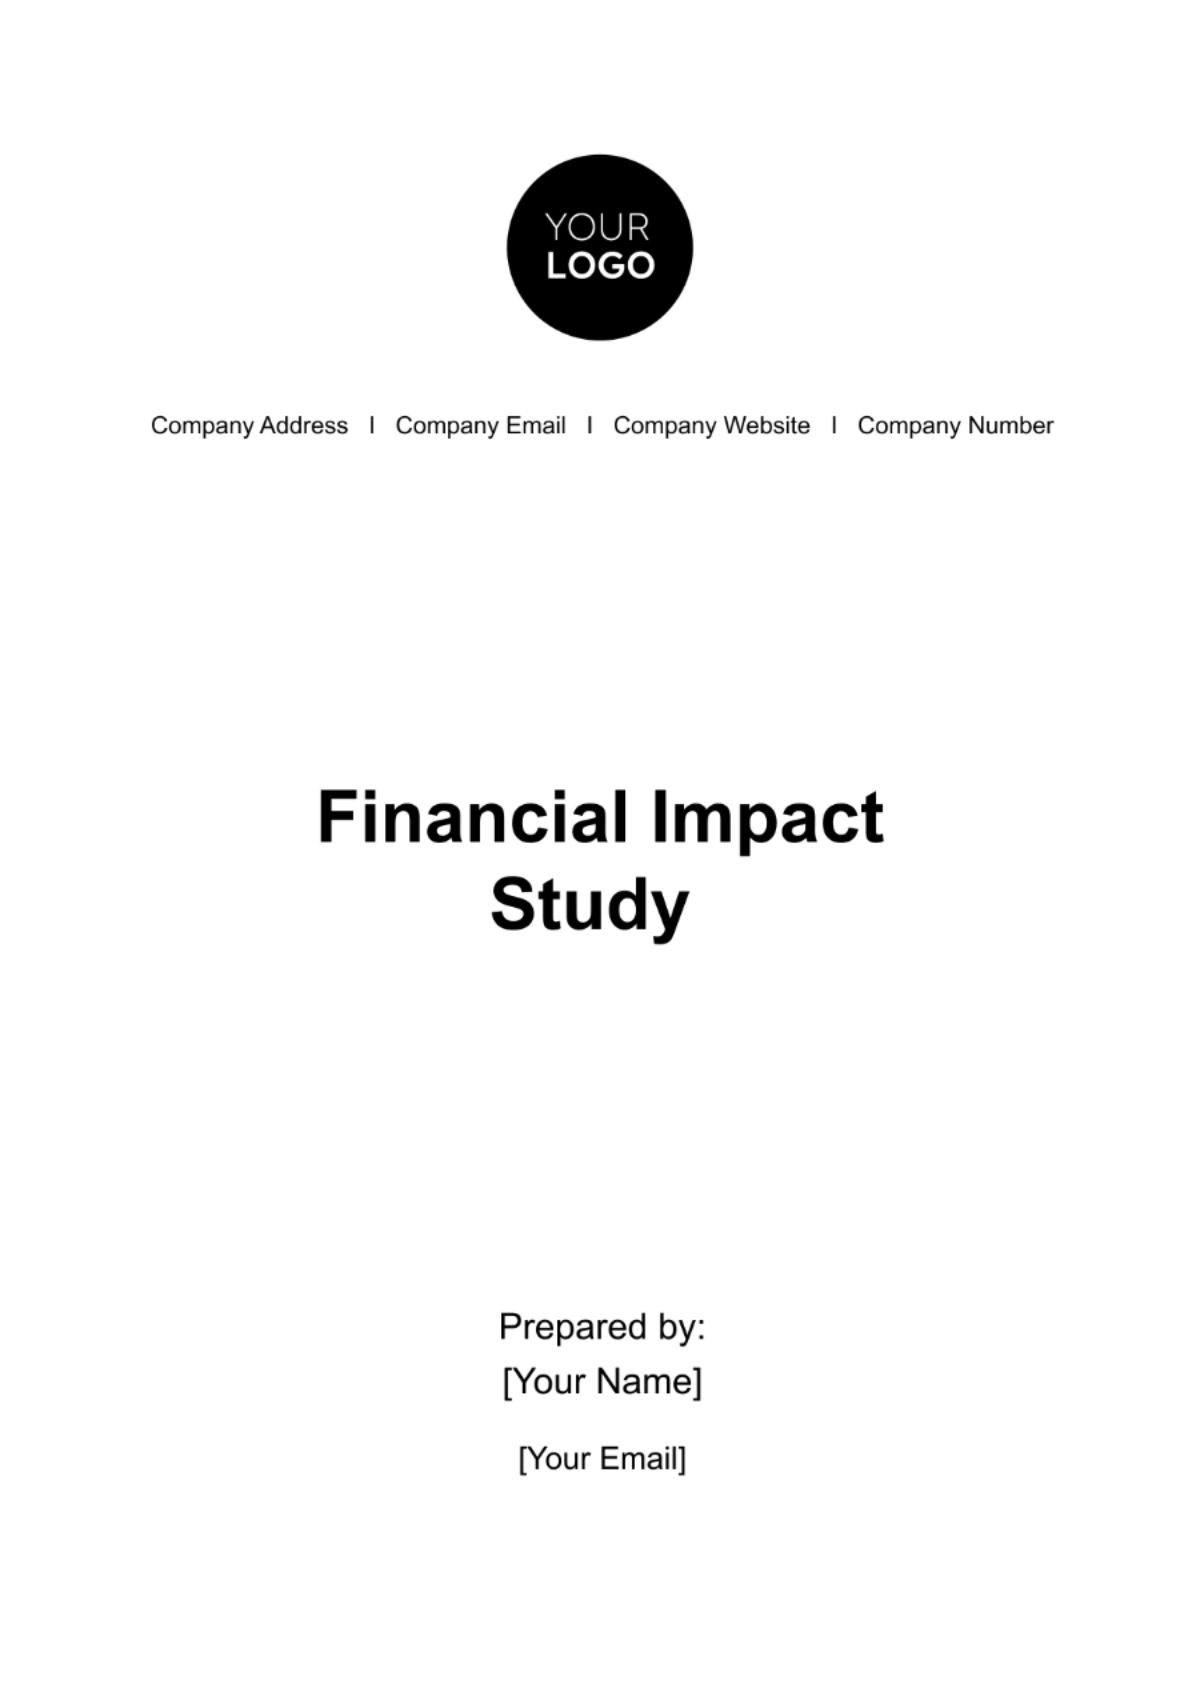 Financial Impact Study Template